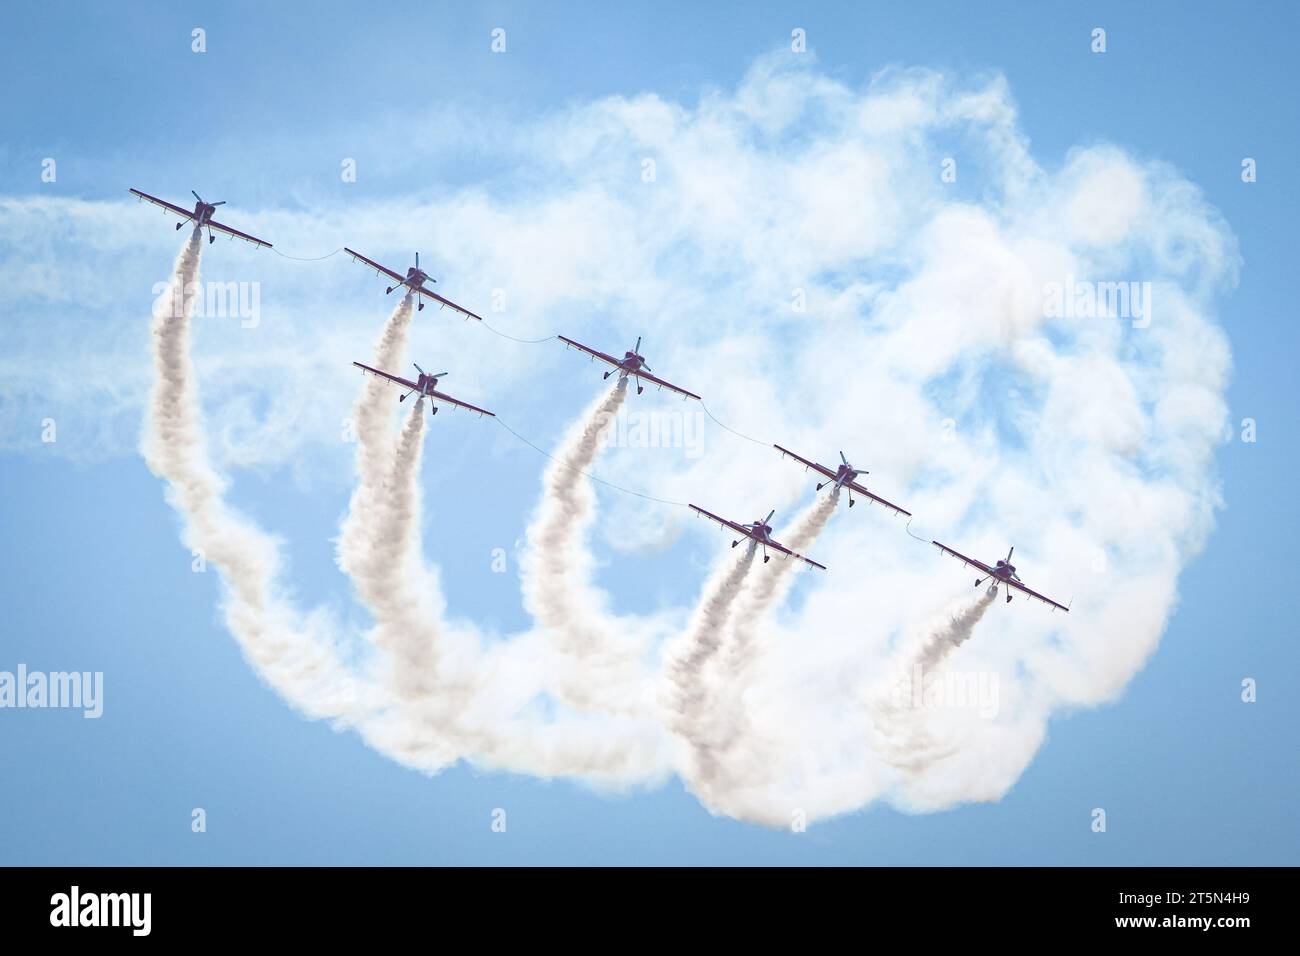 ISTANBUL, TURKIYE - MAY 01, 2023: Moroccan Marche Verte - Green March aerobatic demonstration team display in Istanbul Ataturk Airport during Teknofes Stock Photo